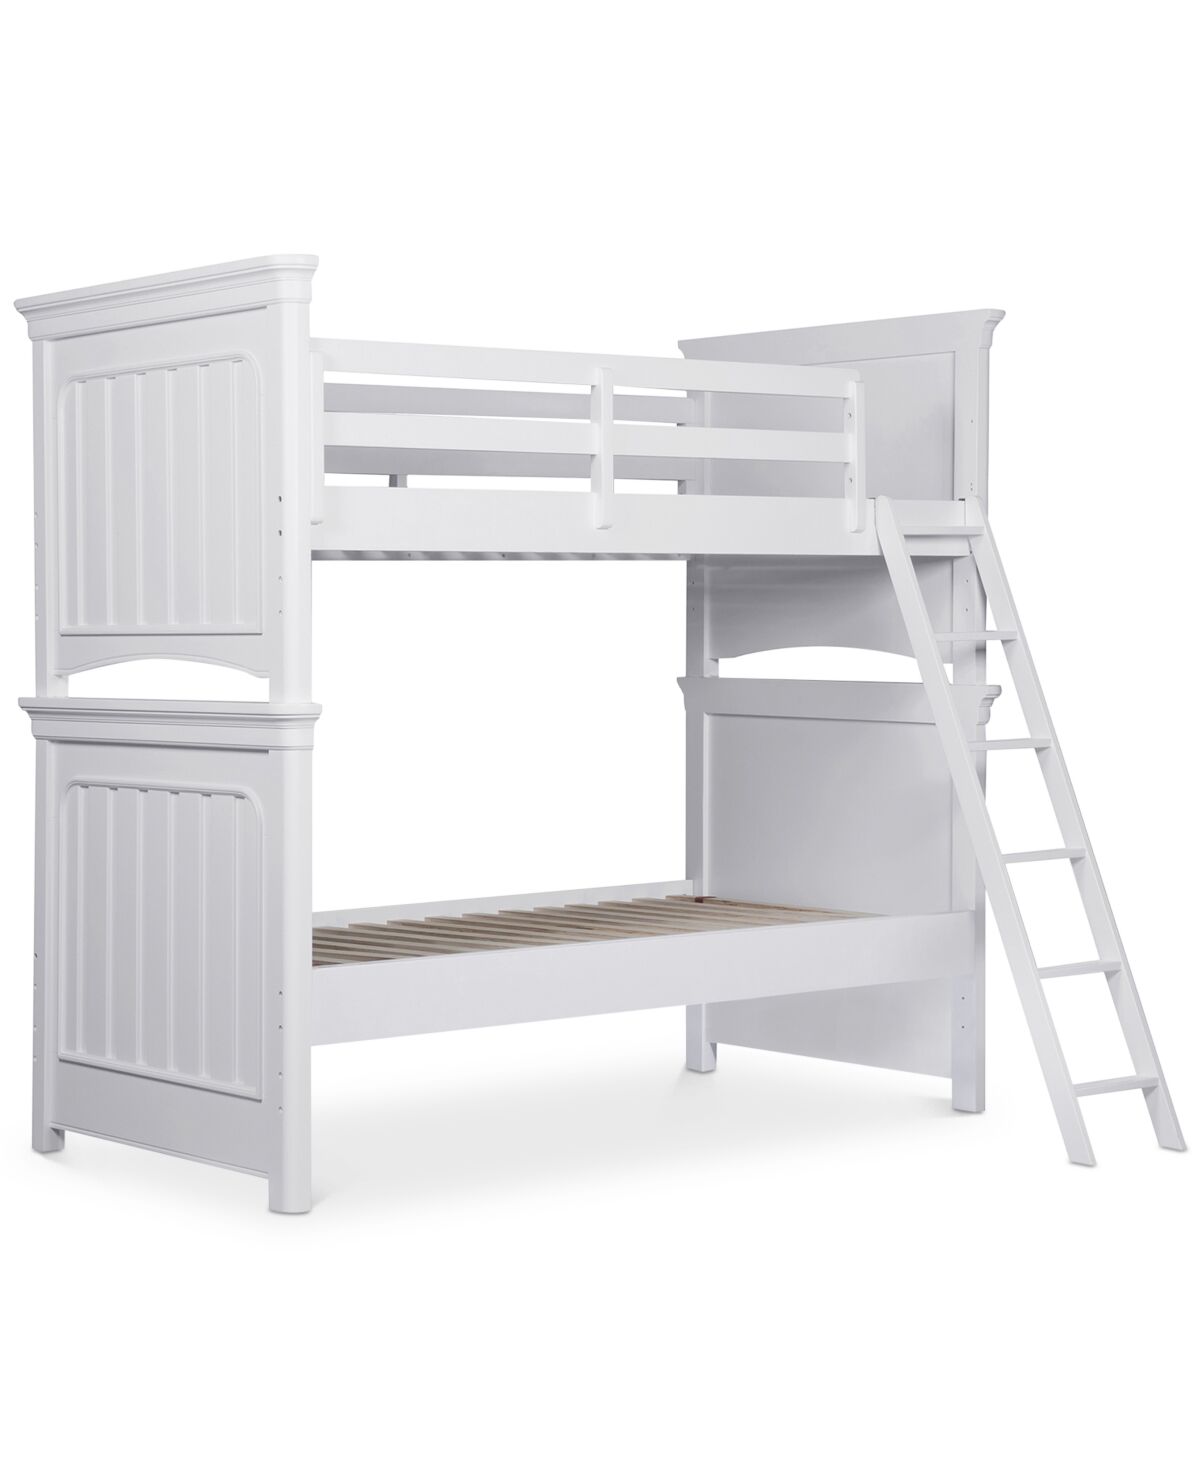 Furniture Summertime Kids Twin over Twin Bunk Bed - White